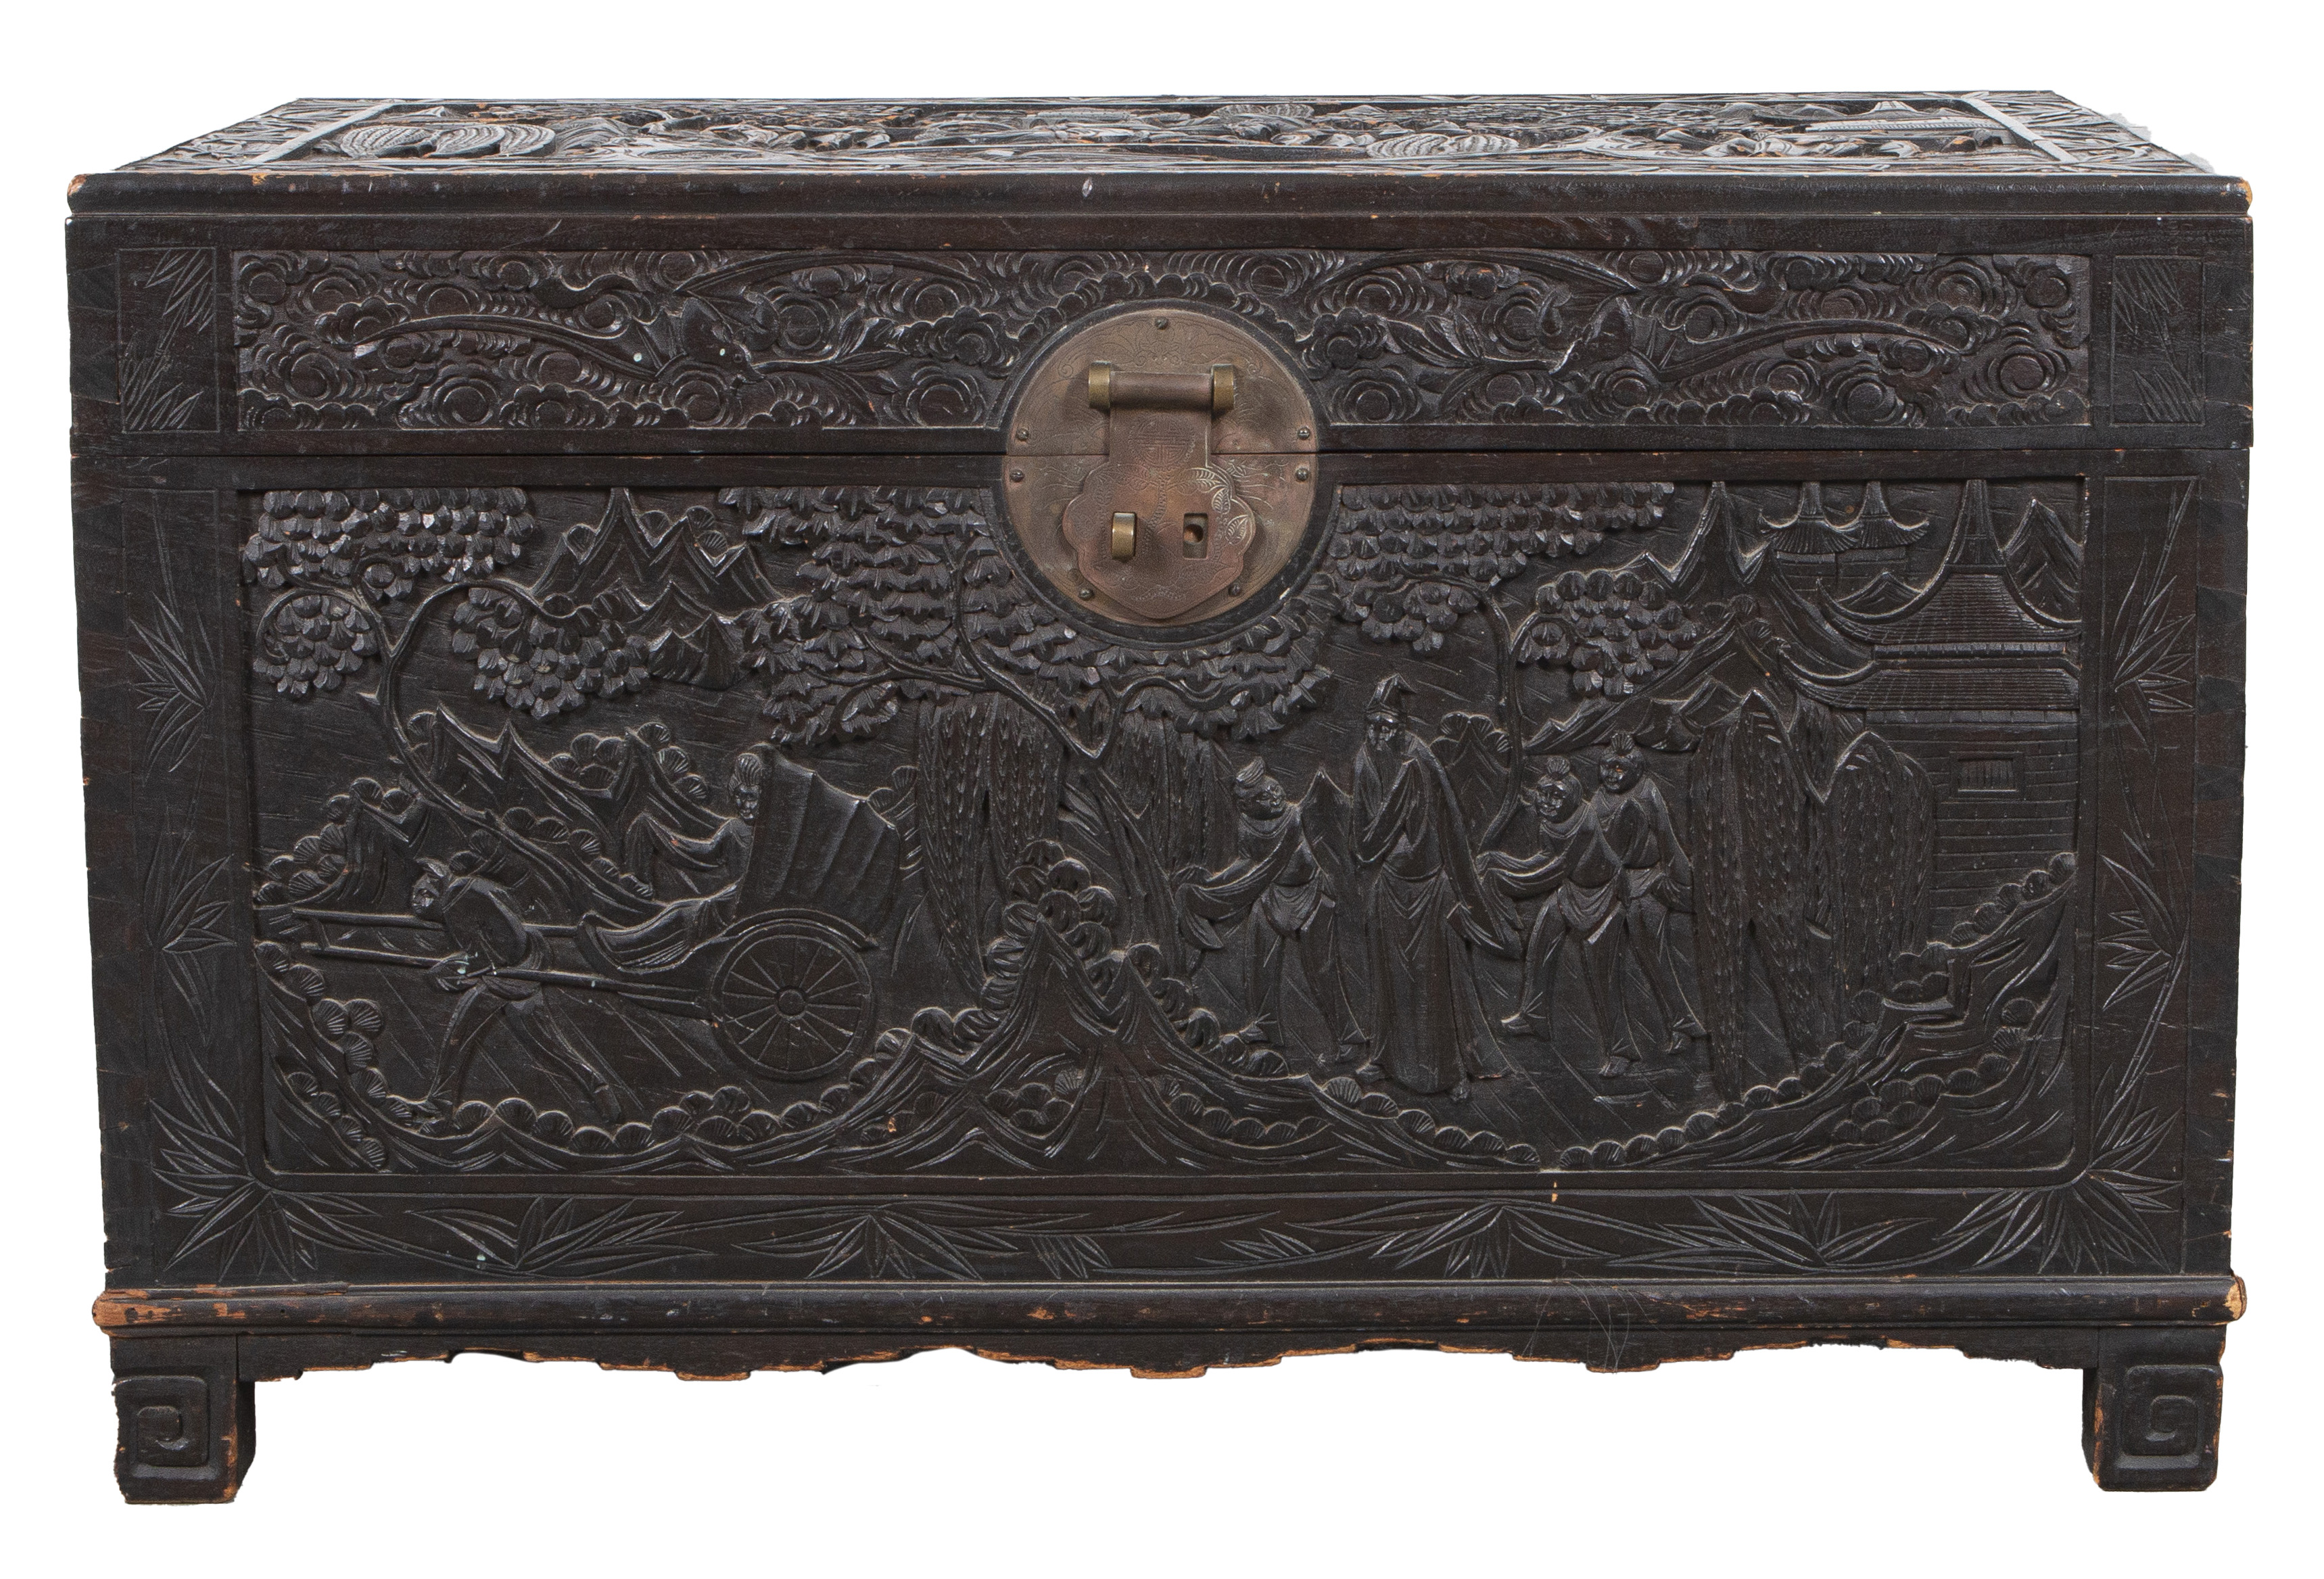 ASIAN CARVED HARDWOOD STORAGE CHEST